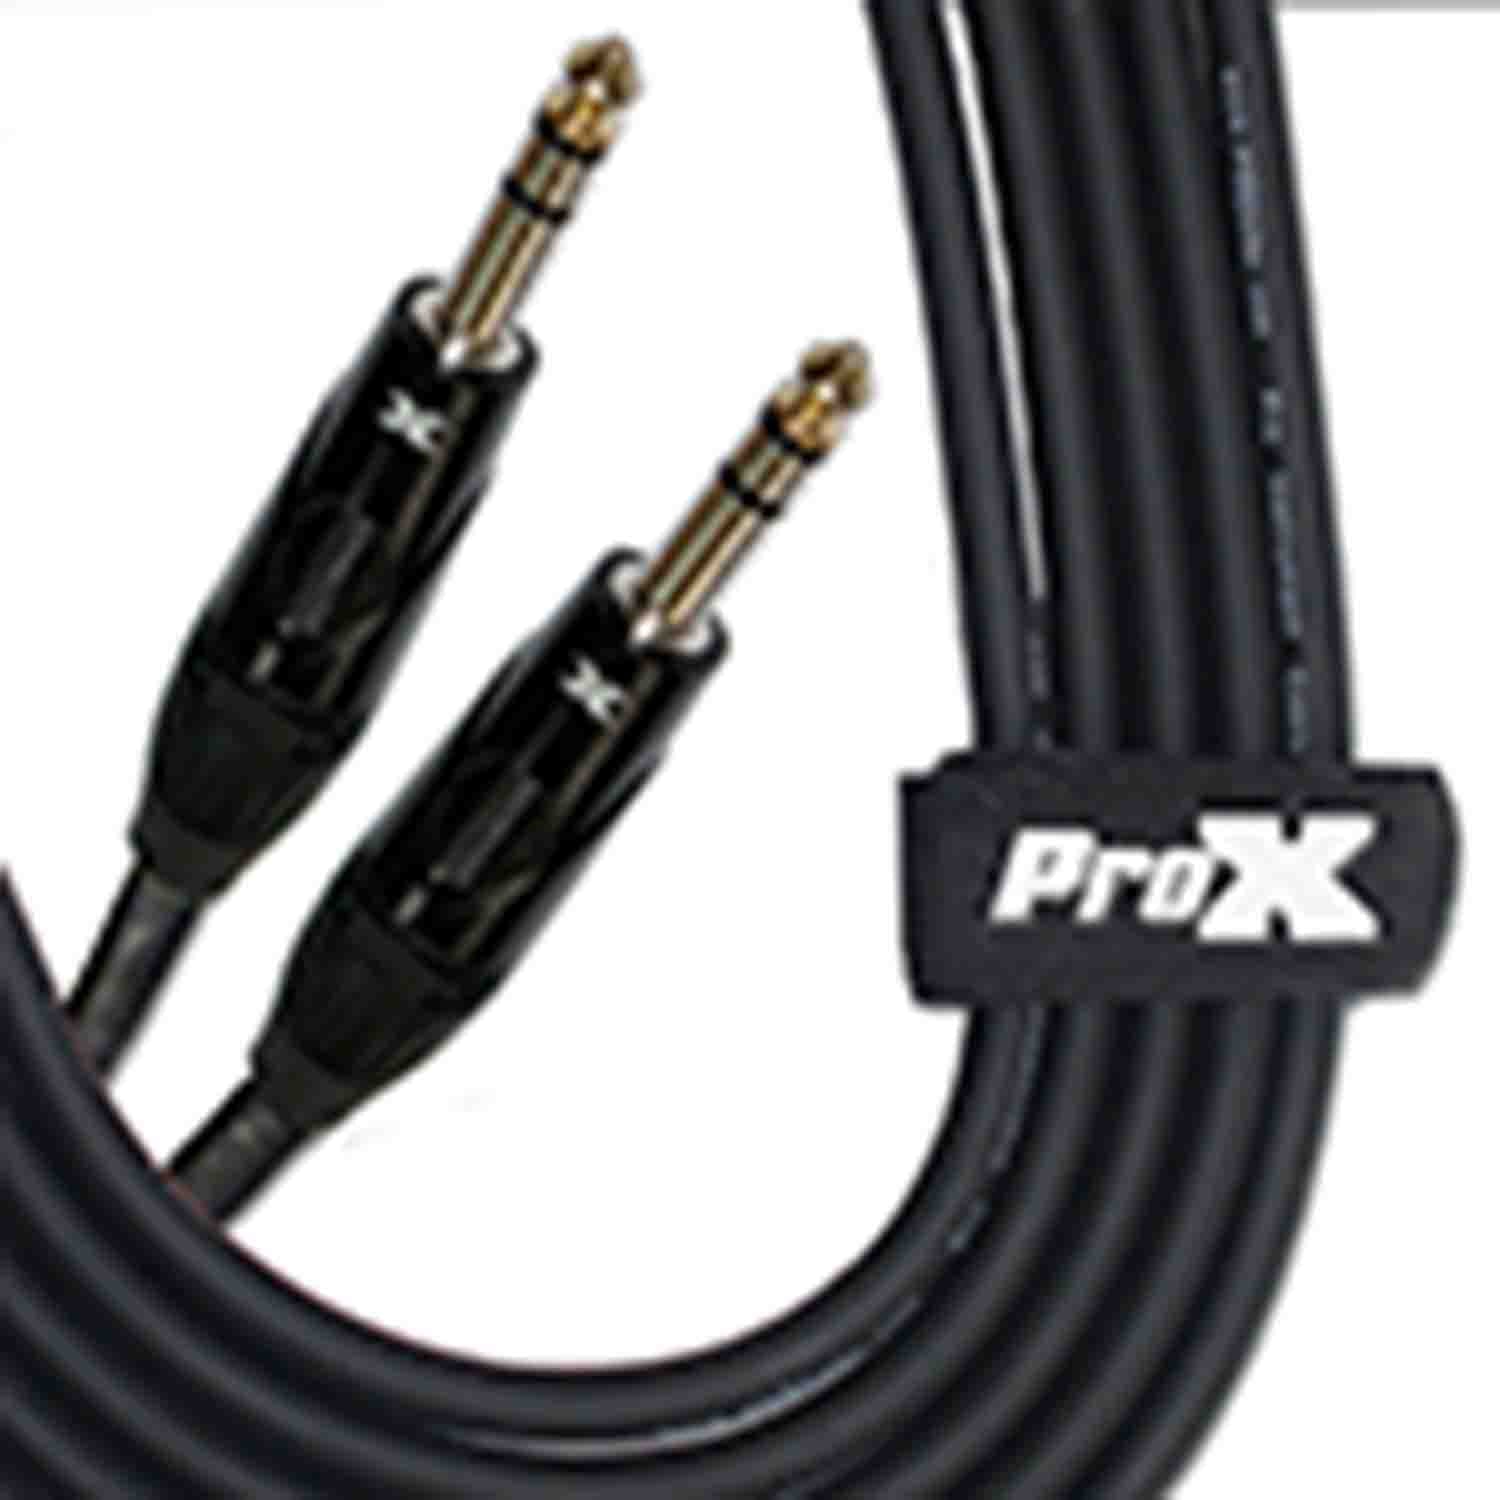 Prox XC-TRS25 Balanced 1/4" TRS-M to TRS-M High Performance Audio Cable - 25 Feet - Hollywood DJ